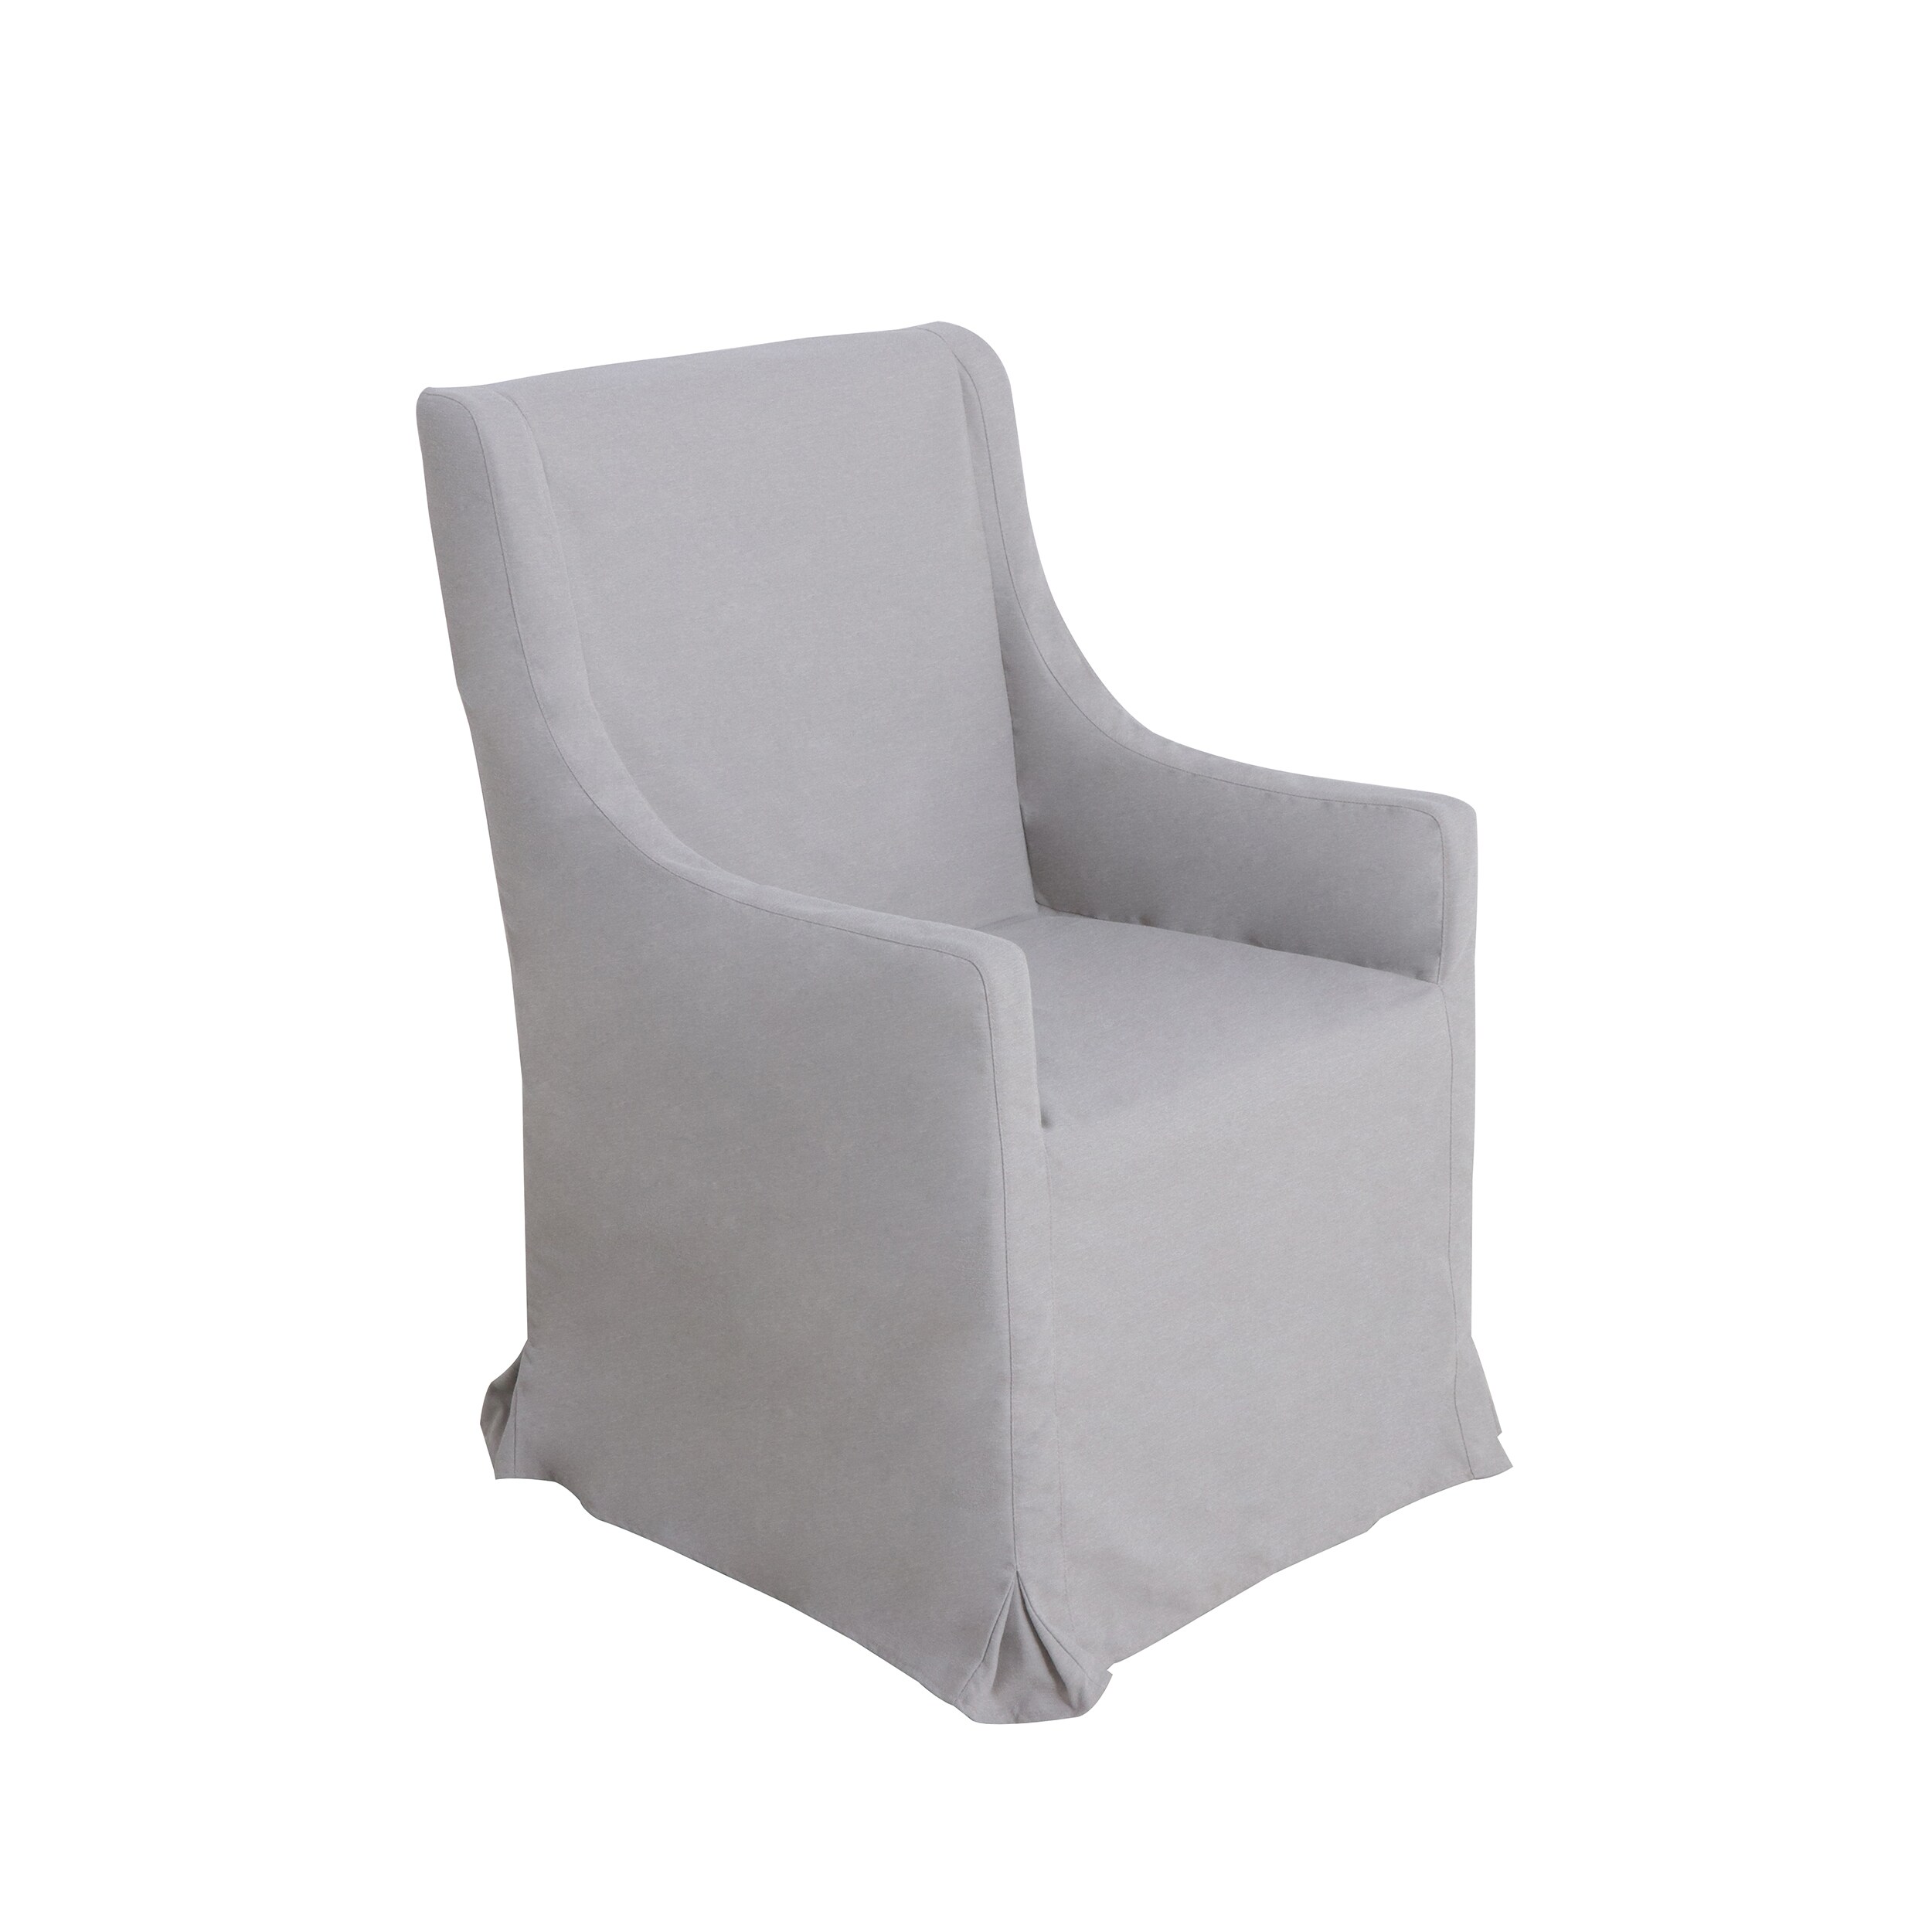 Roth Riverchase White Olefin Chair, Chair Slipcovers For Chairs With Arms